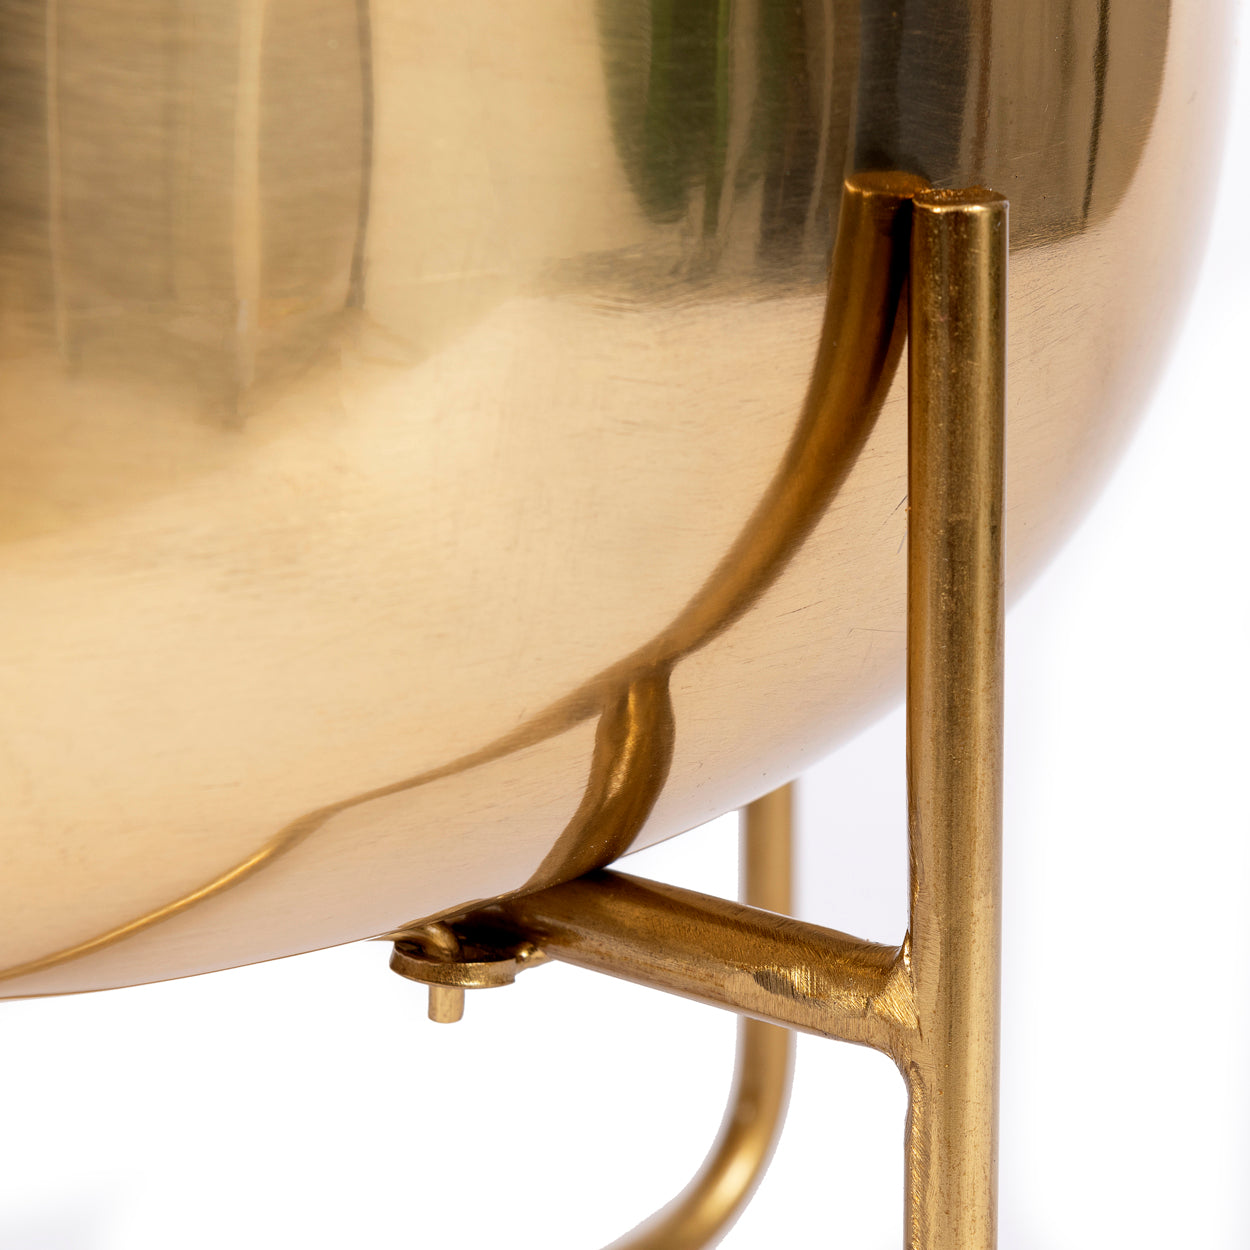 THE BRASS Planter On Stand crop detail